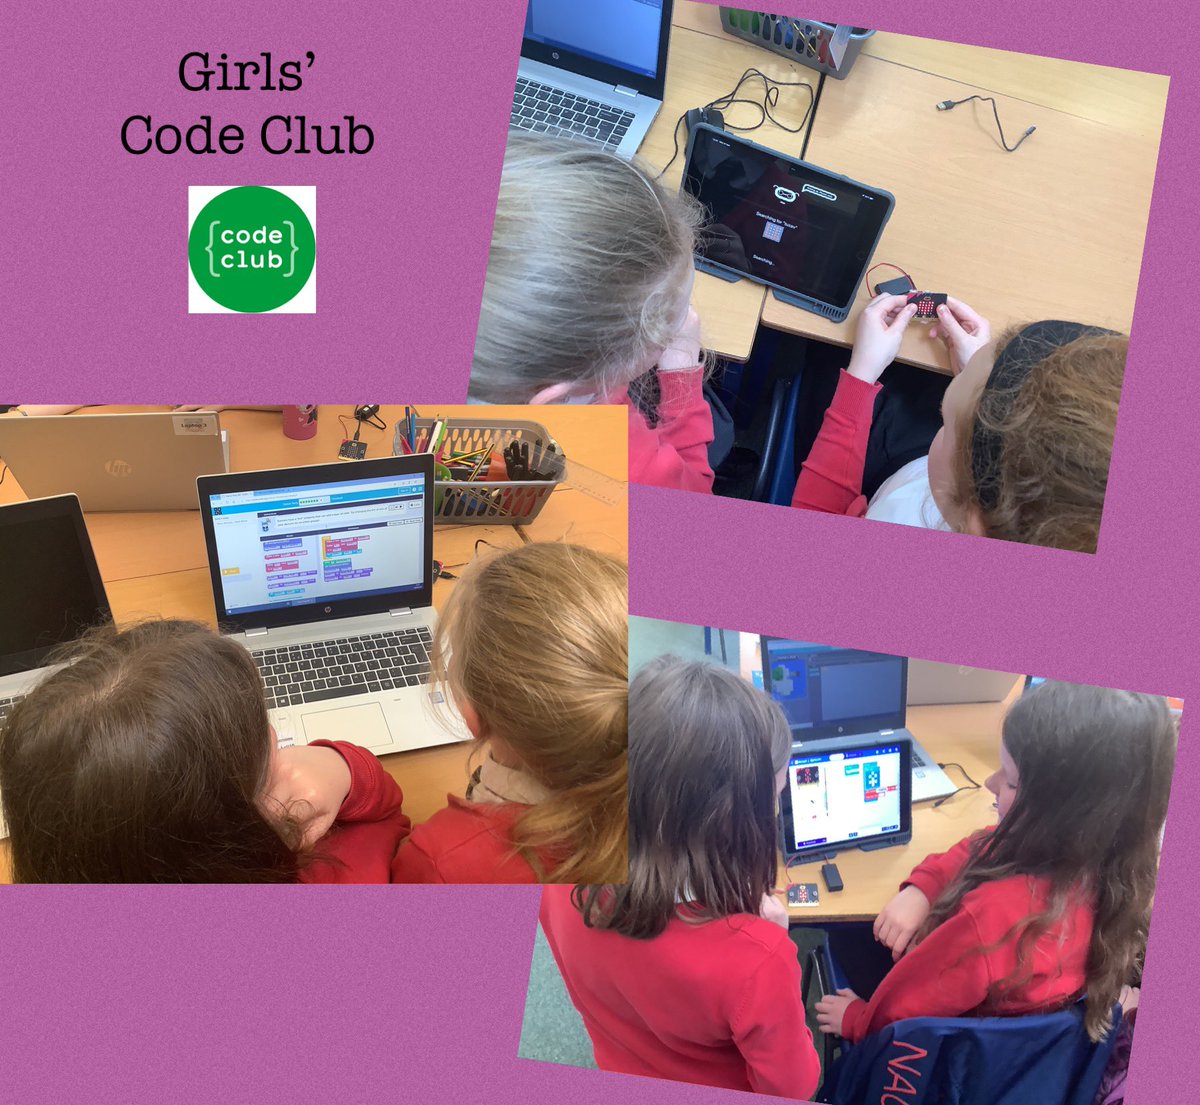 This week, we continued with some block coding and some of us even tried coding with the micro:bits 👍 Looking forward to showing our adults next week what we have been learning #techshecan #shecancode